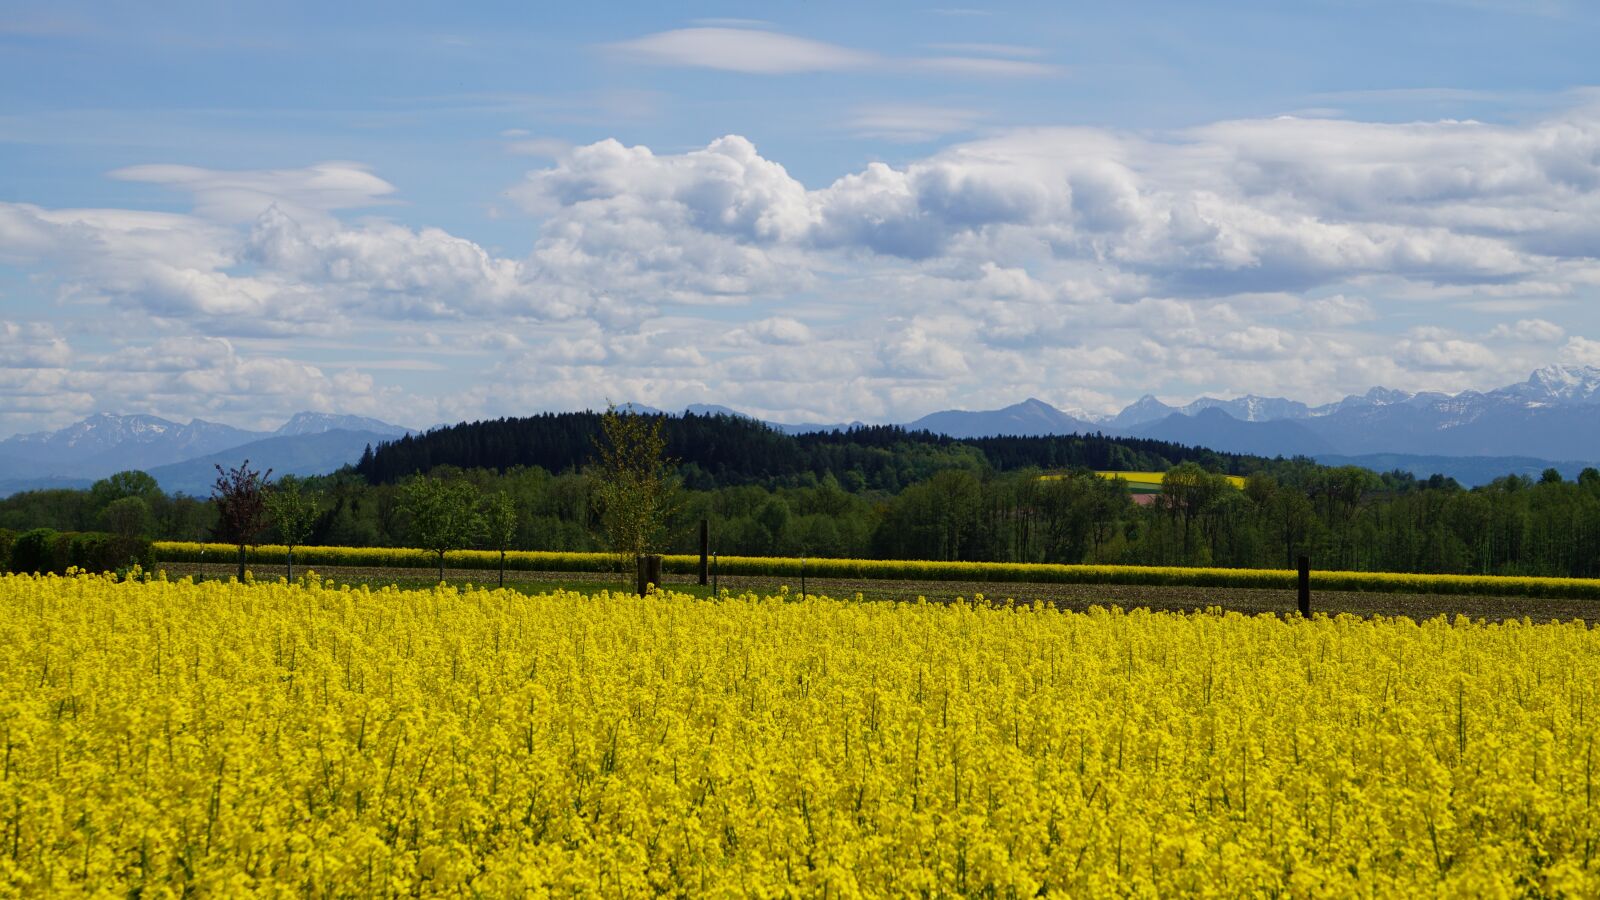 Sony a6000 sample photo. Field of rapeseeds, nature photography